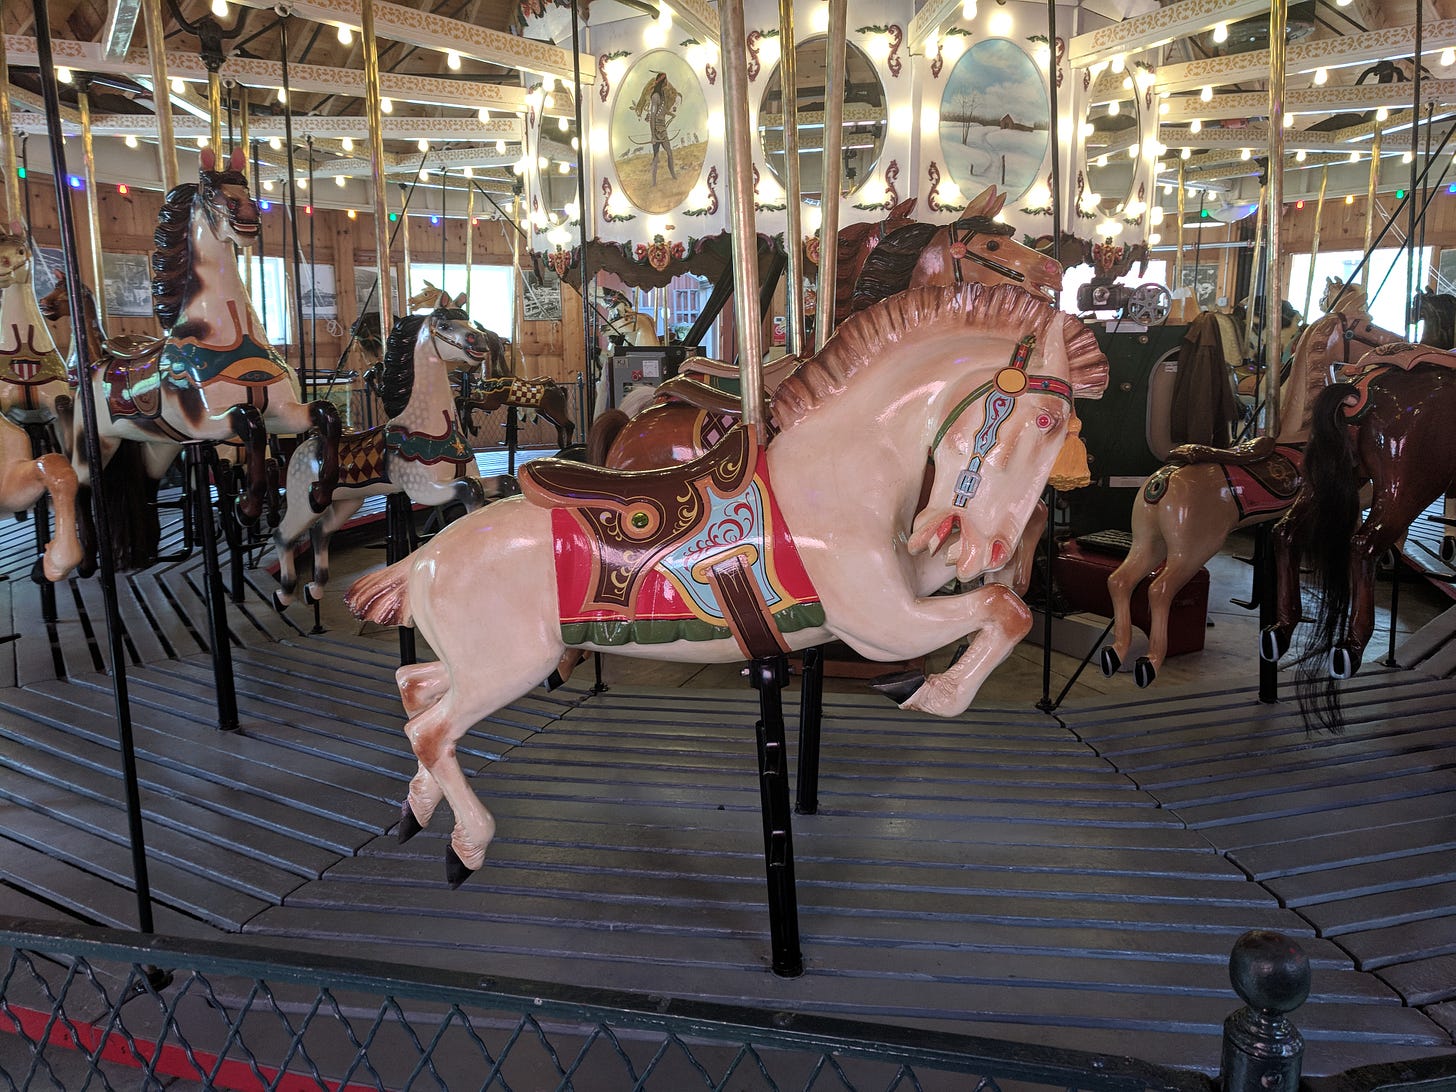 Carousel on display at the Herschell Factory Museum